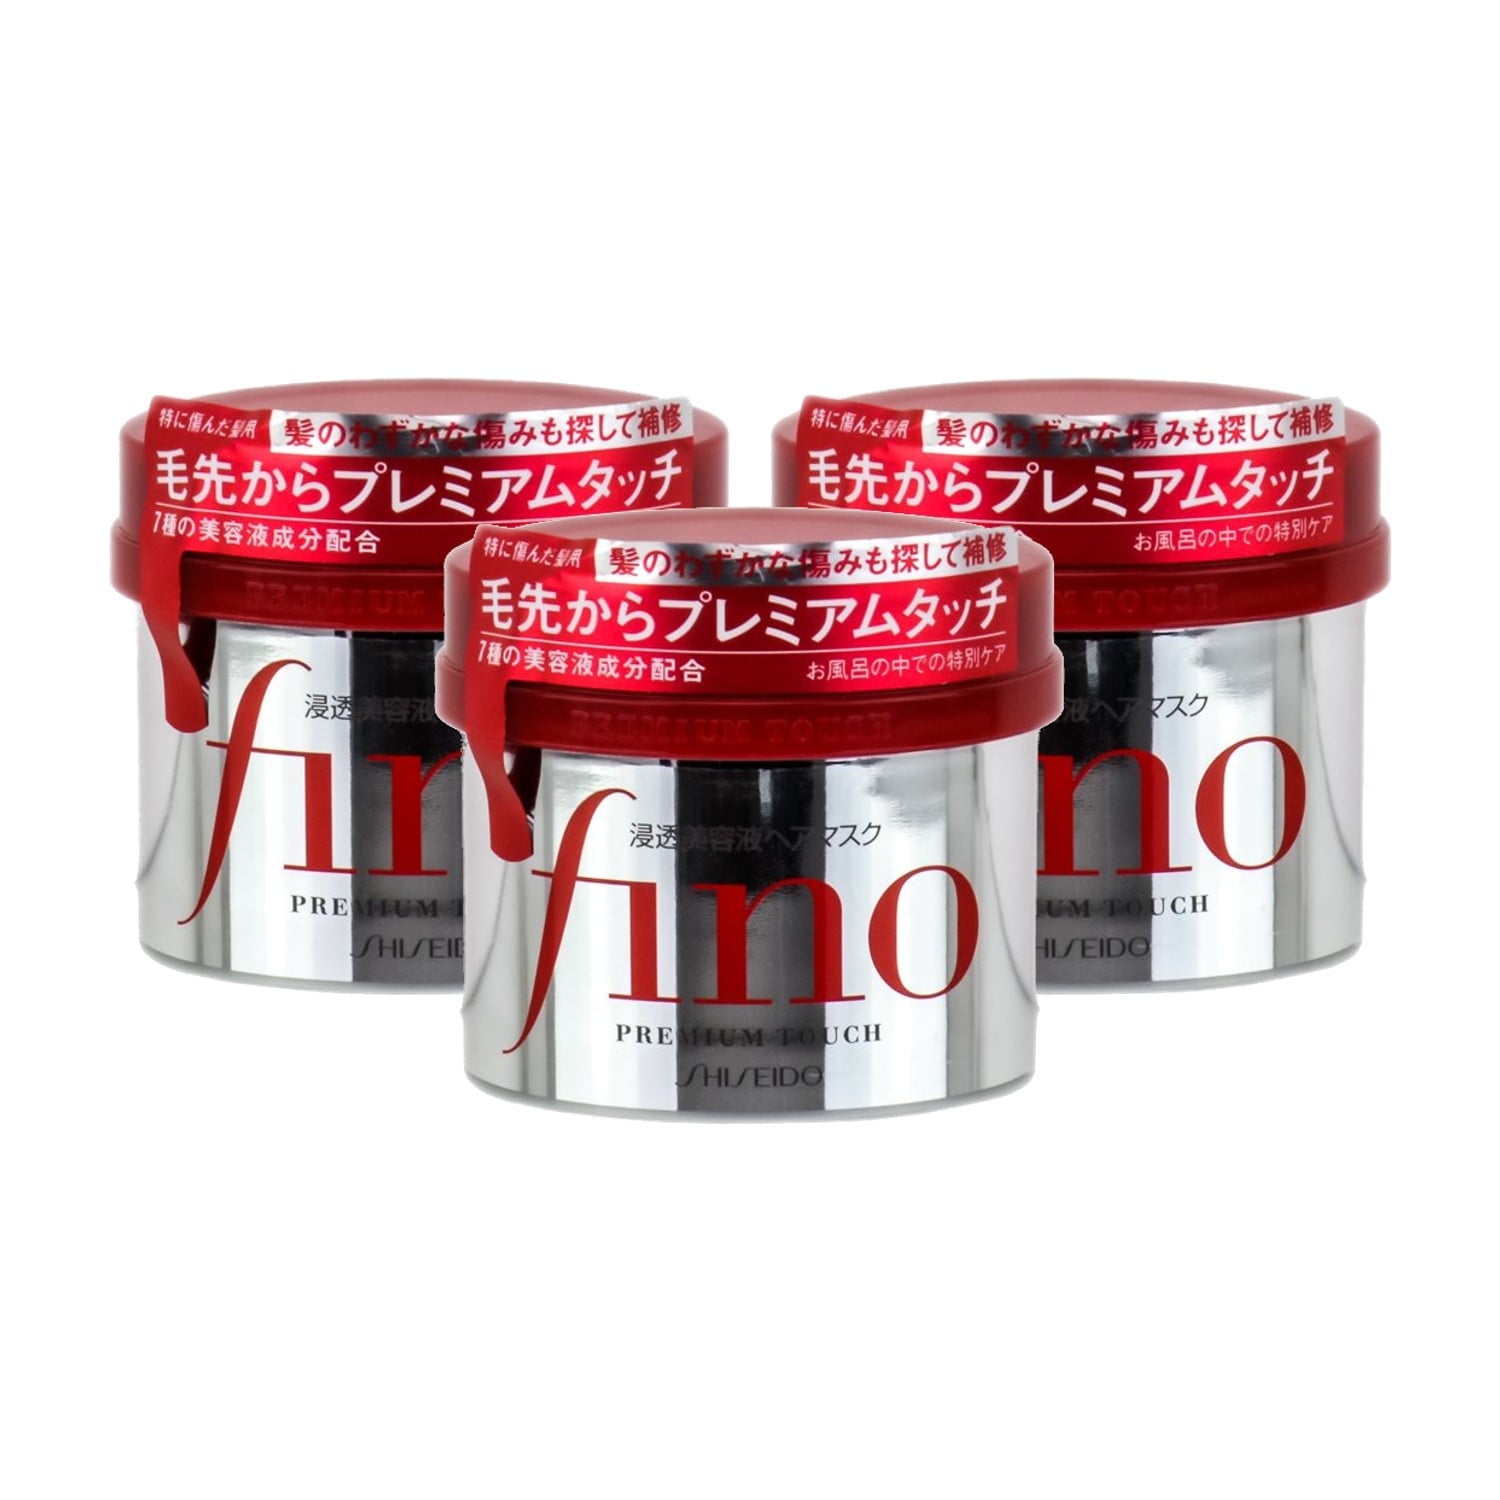 Shisedio Fino Premium Touch Hair Mask Size 8.1 oz Pack Of 3